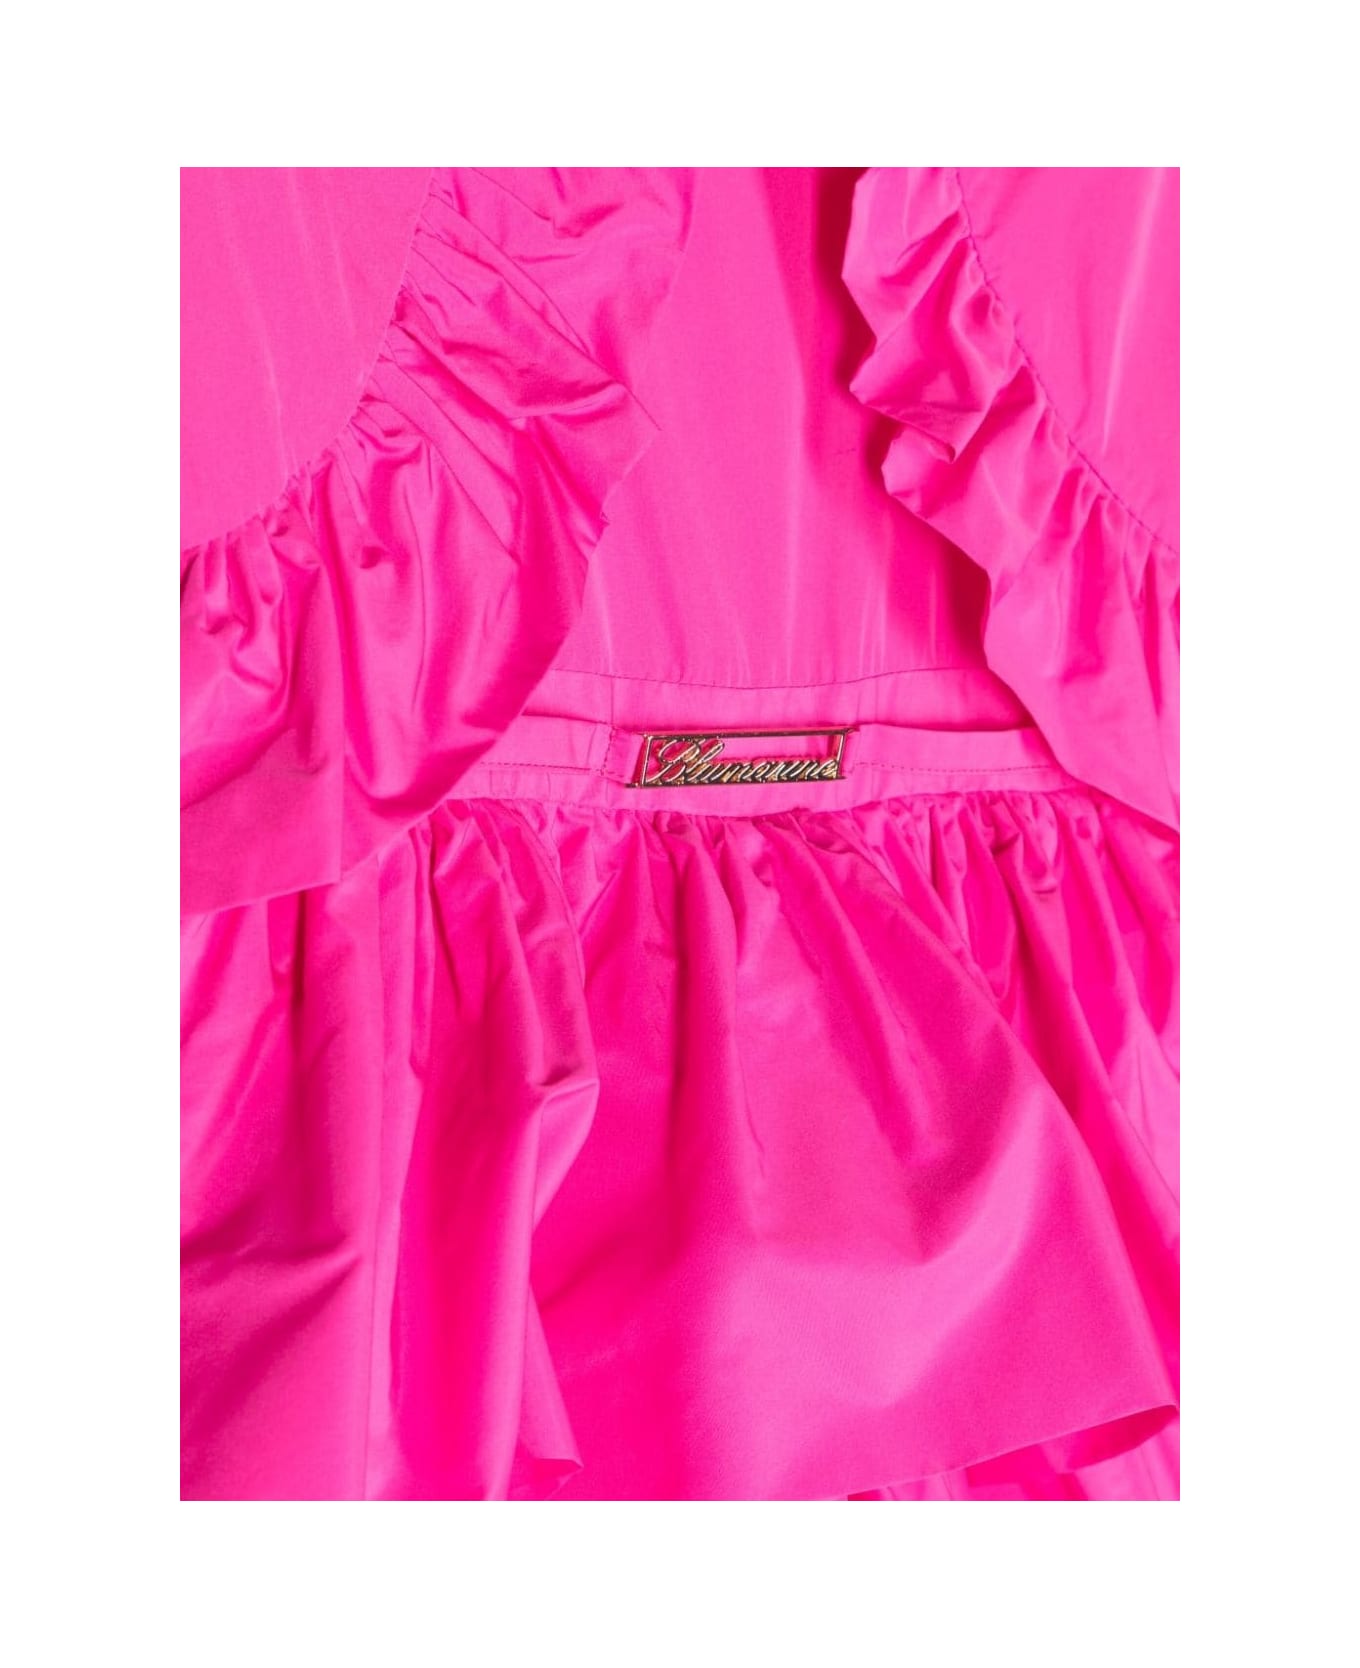 Miss Blumarine Fuchsia Dress With Ruches And Flounces - Pink